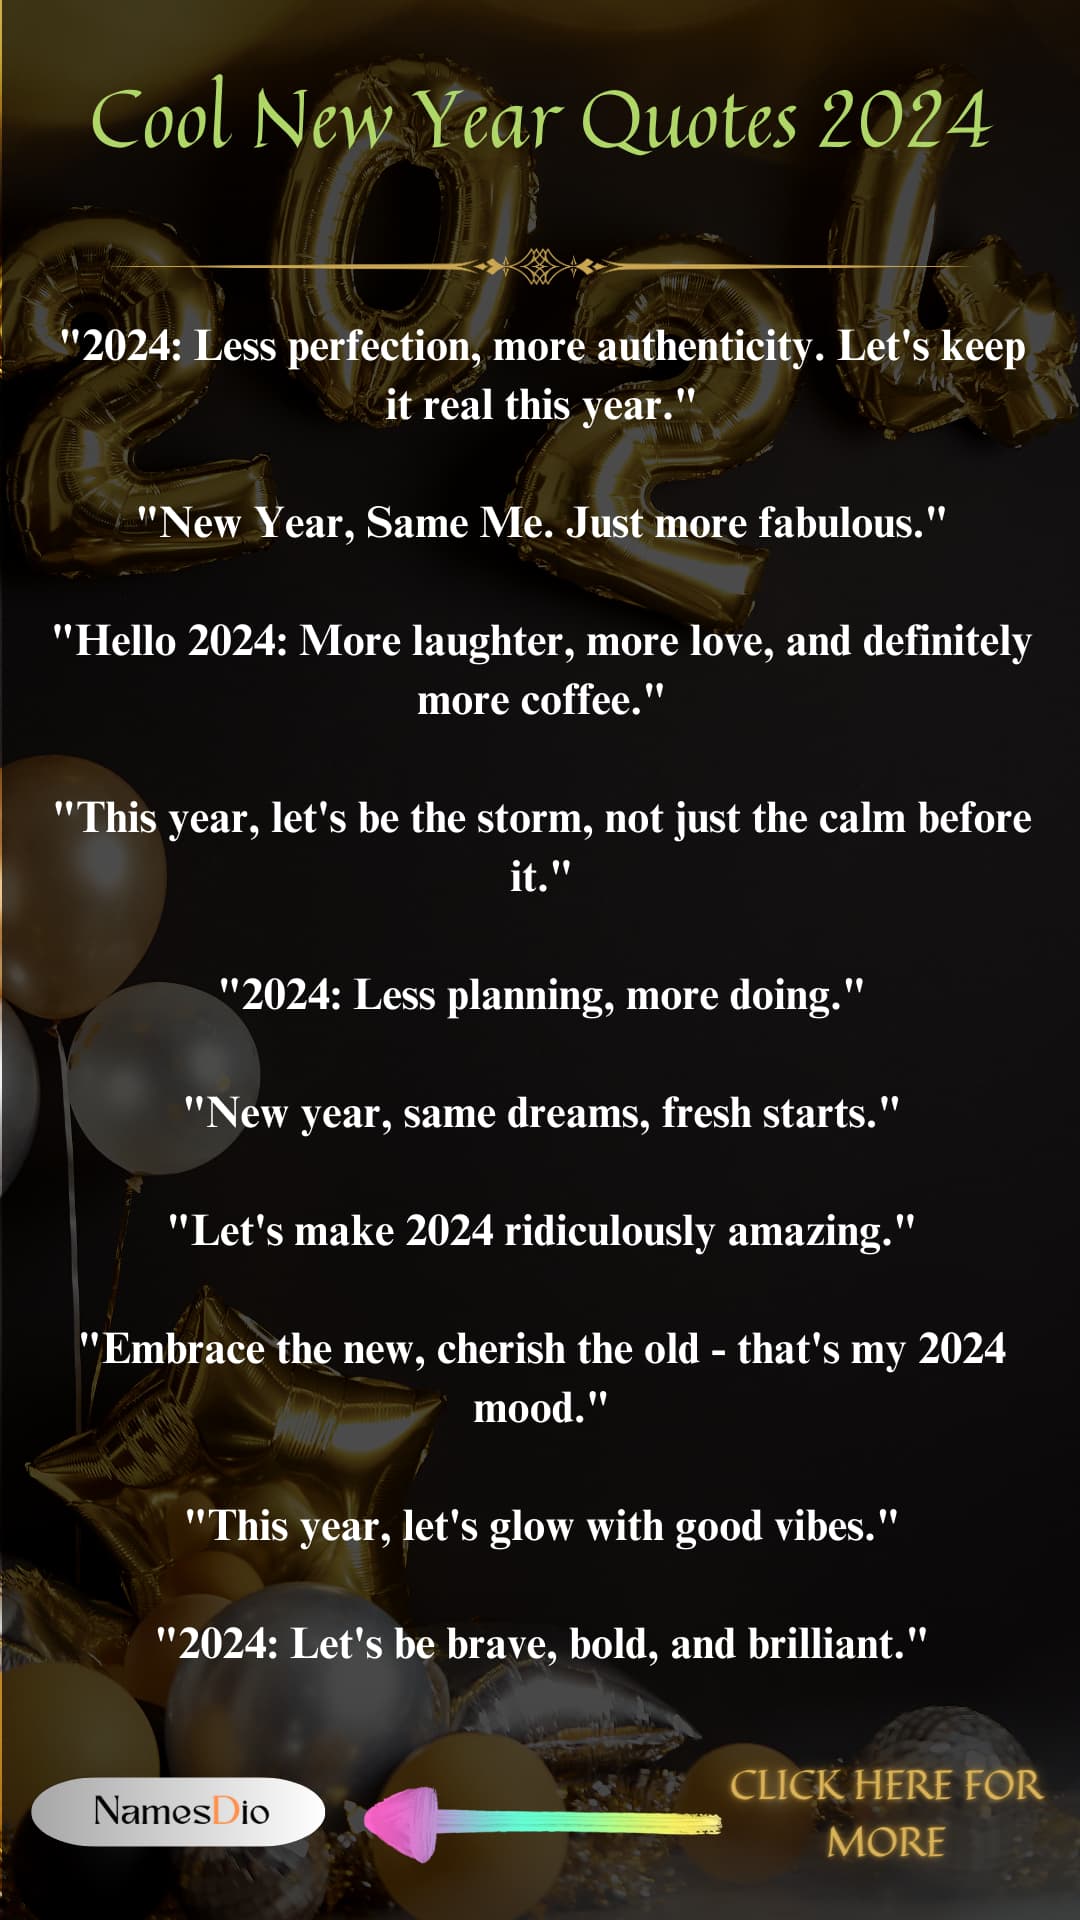 Cool-New-Year-Quotes-2024